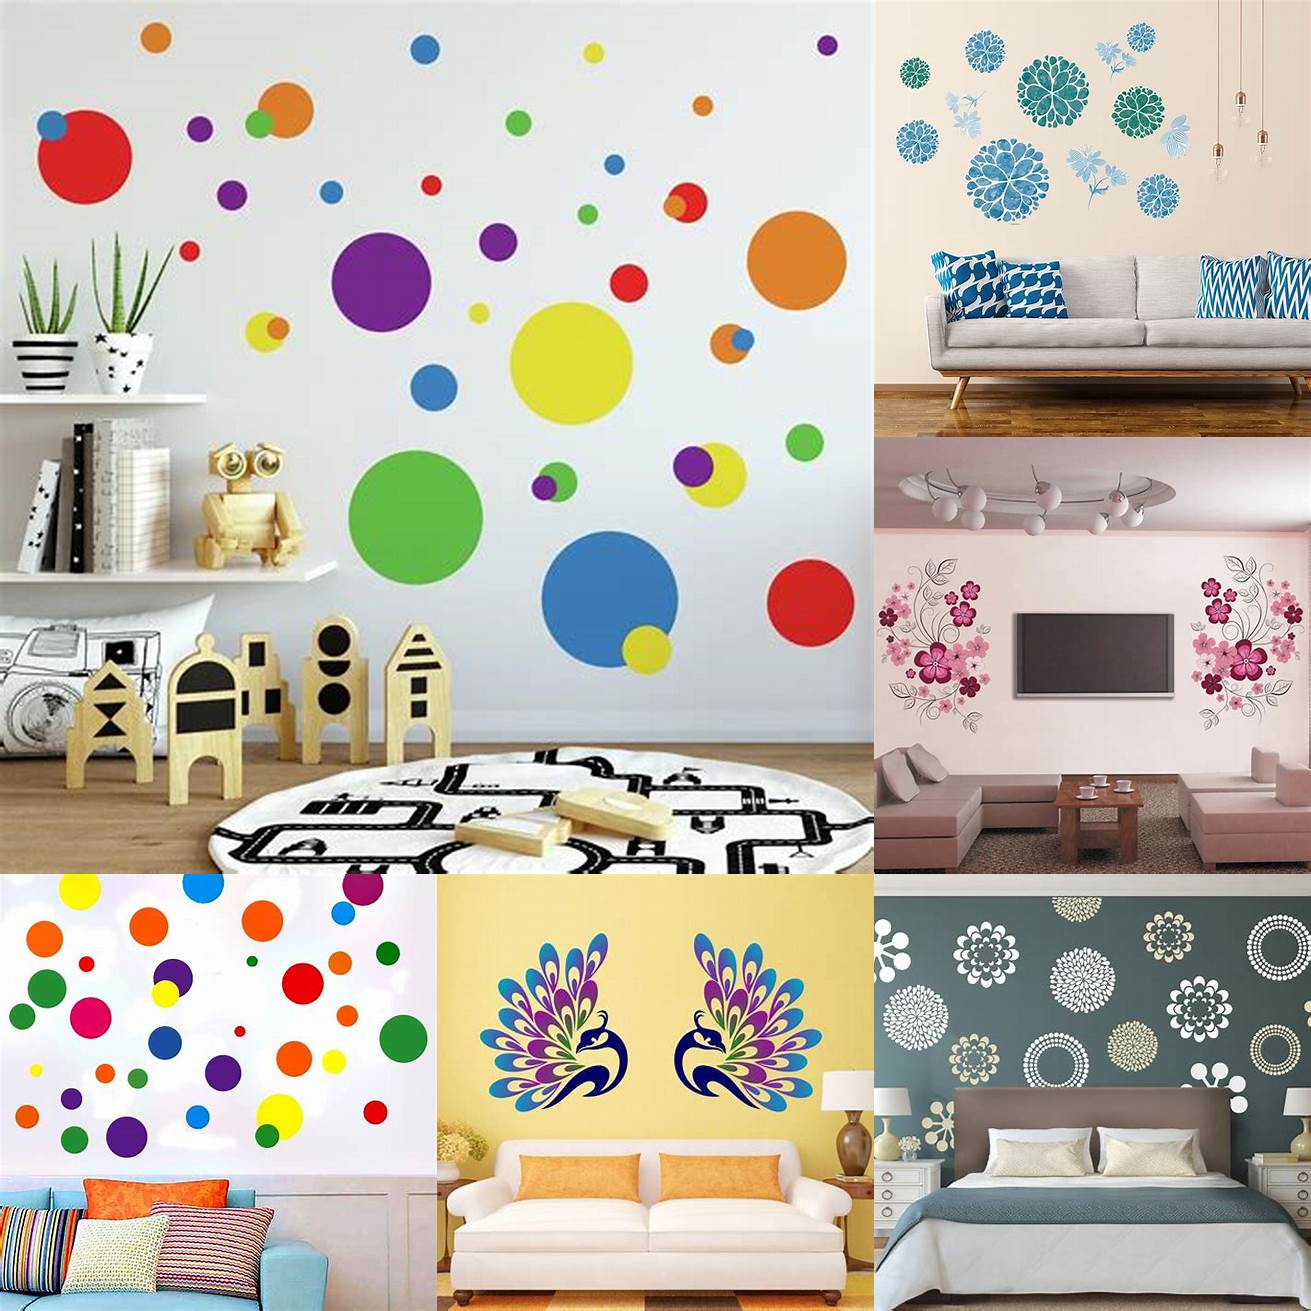 2 Colorful wall decals